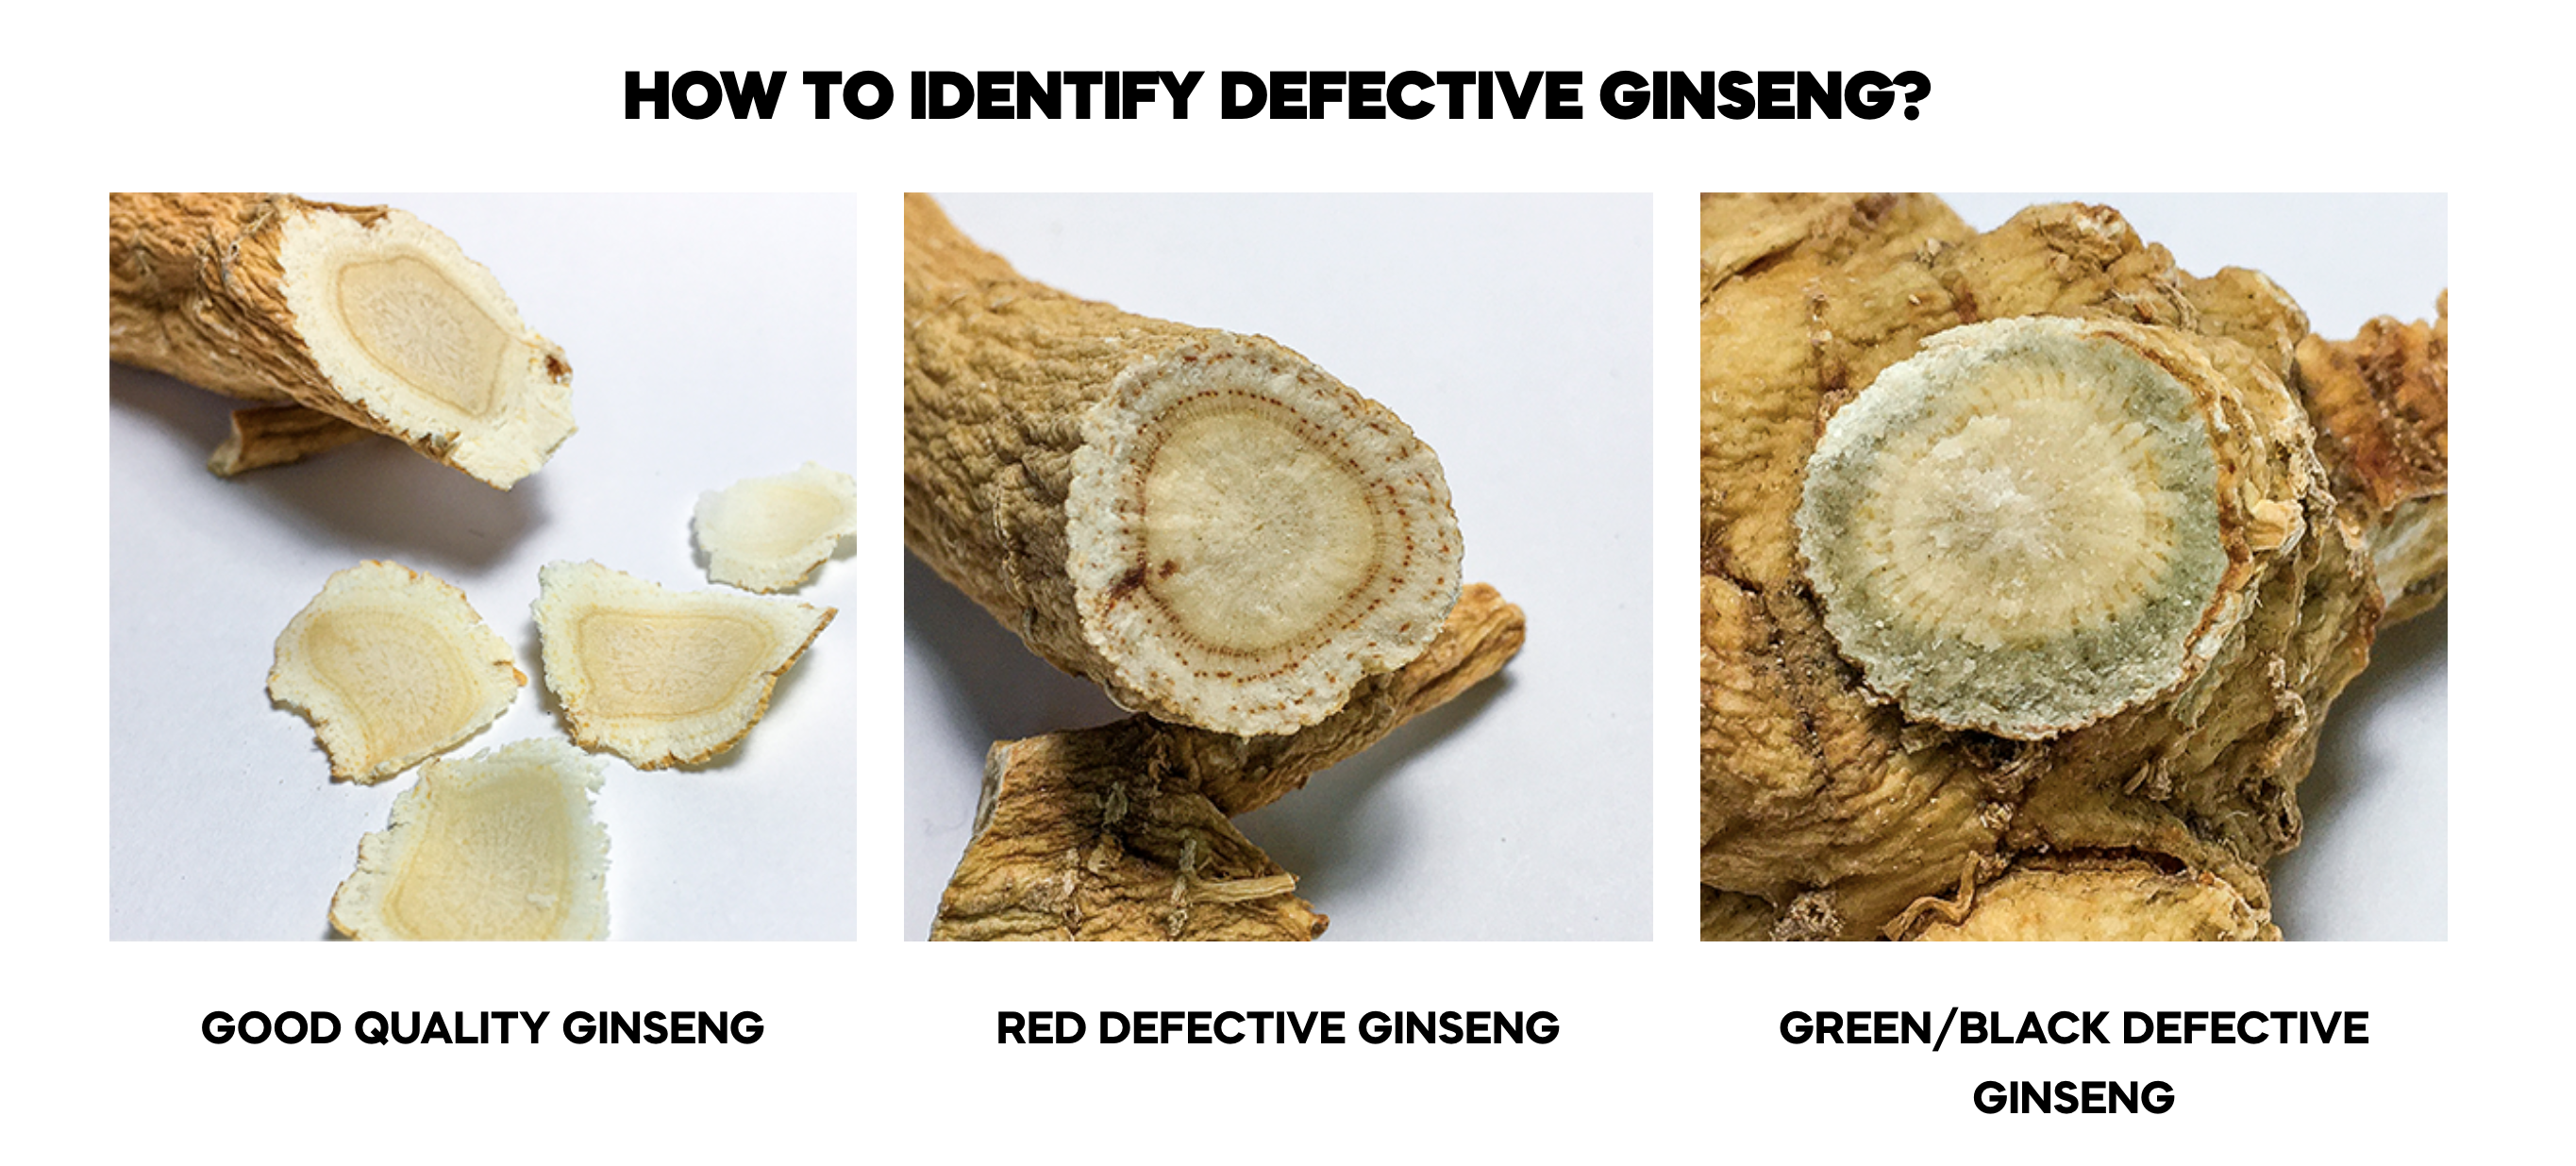 How to identify defective ginseng